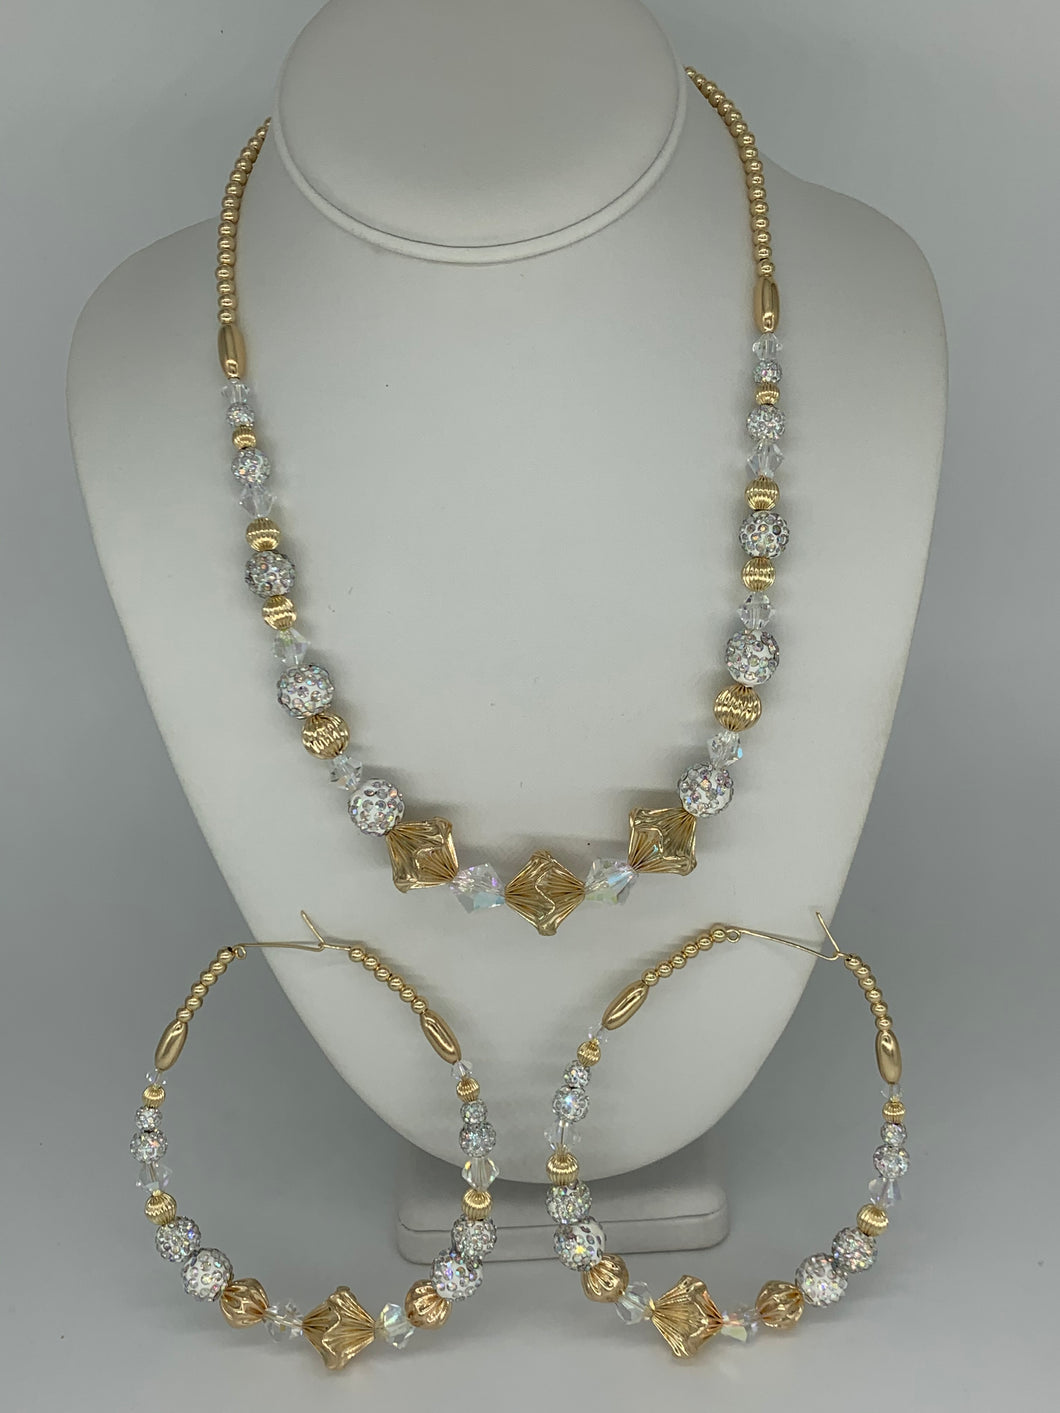 Gold Filled Necklace and Earring Set with Shambella Beads and Crystals